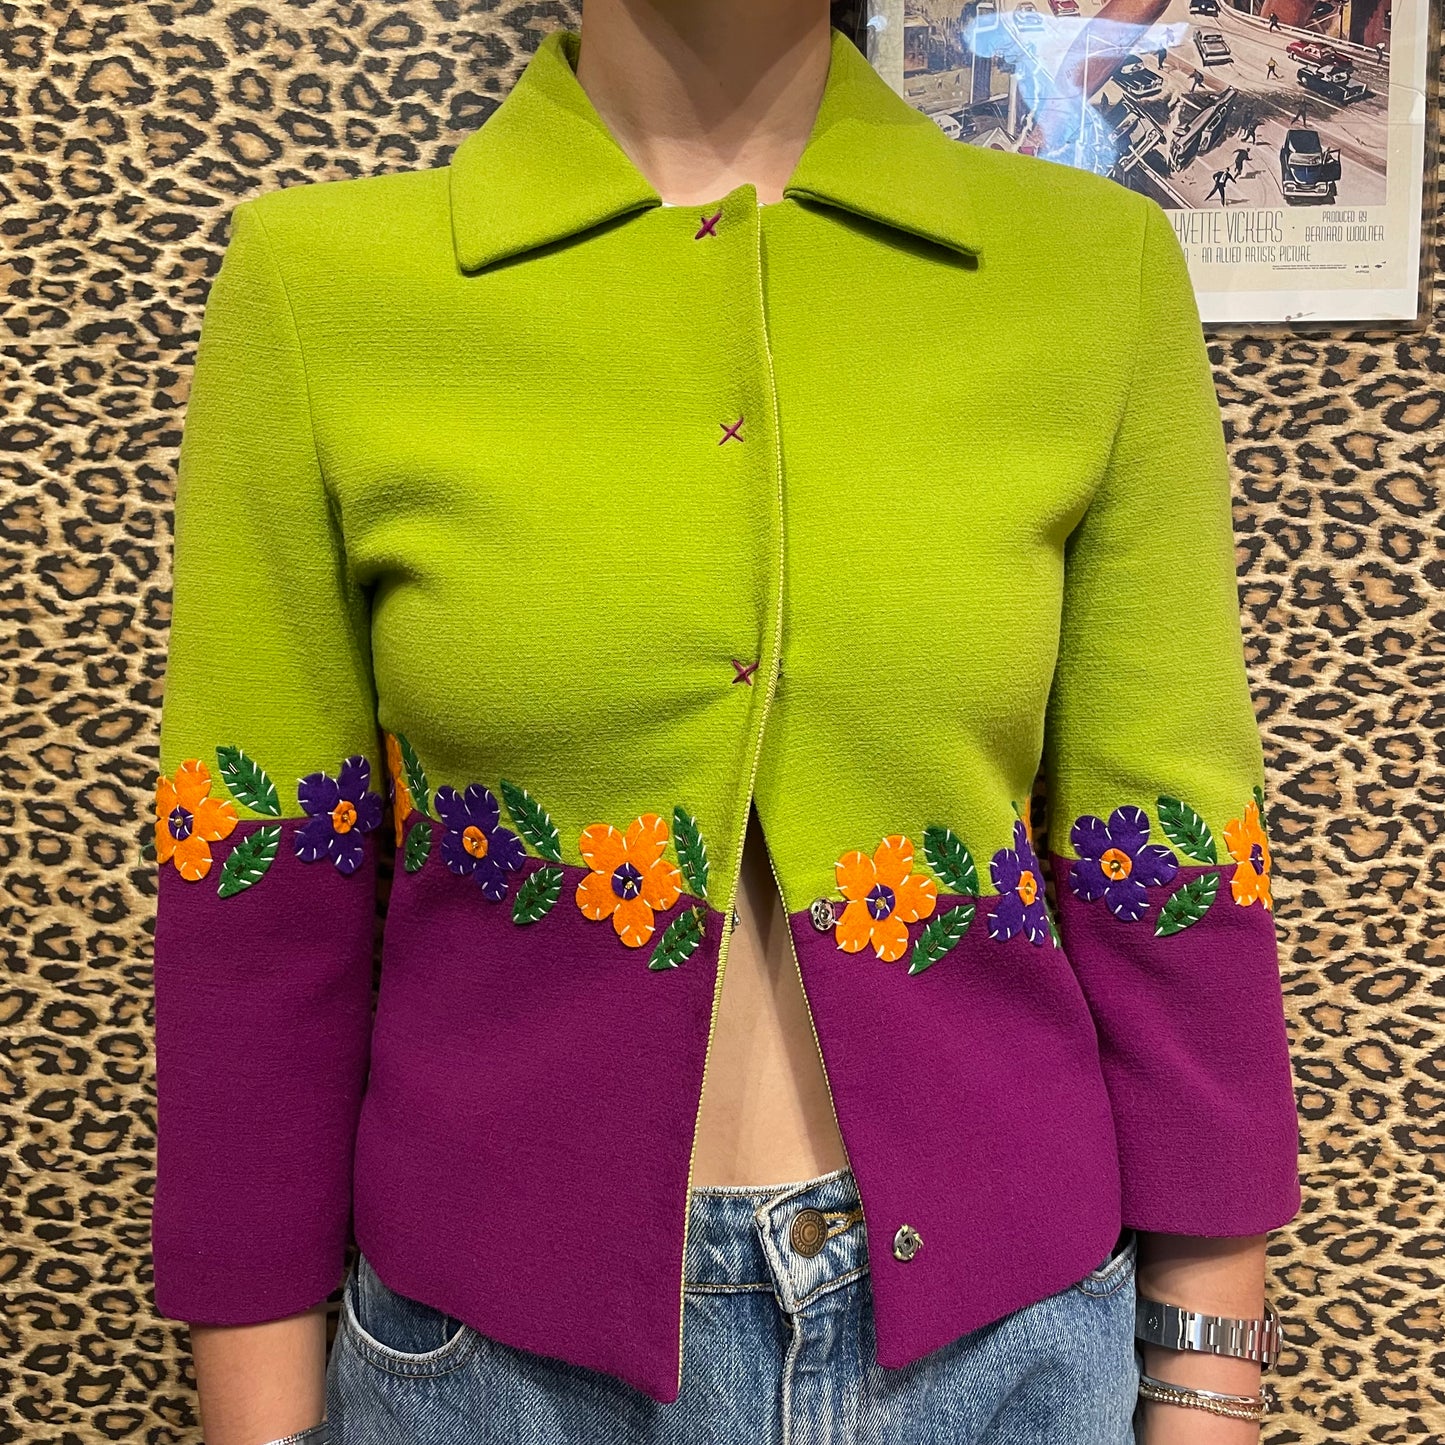 Moschino Cheap and Chic Flower Evening Jacket